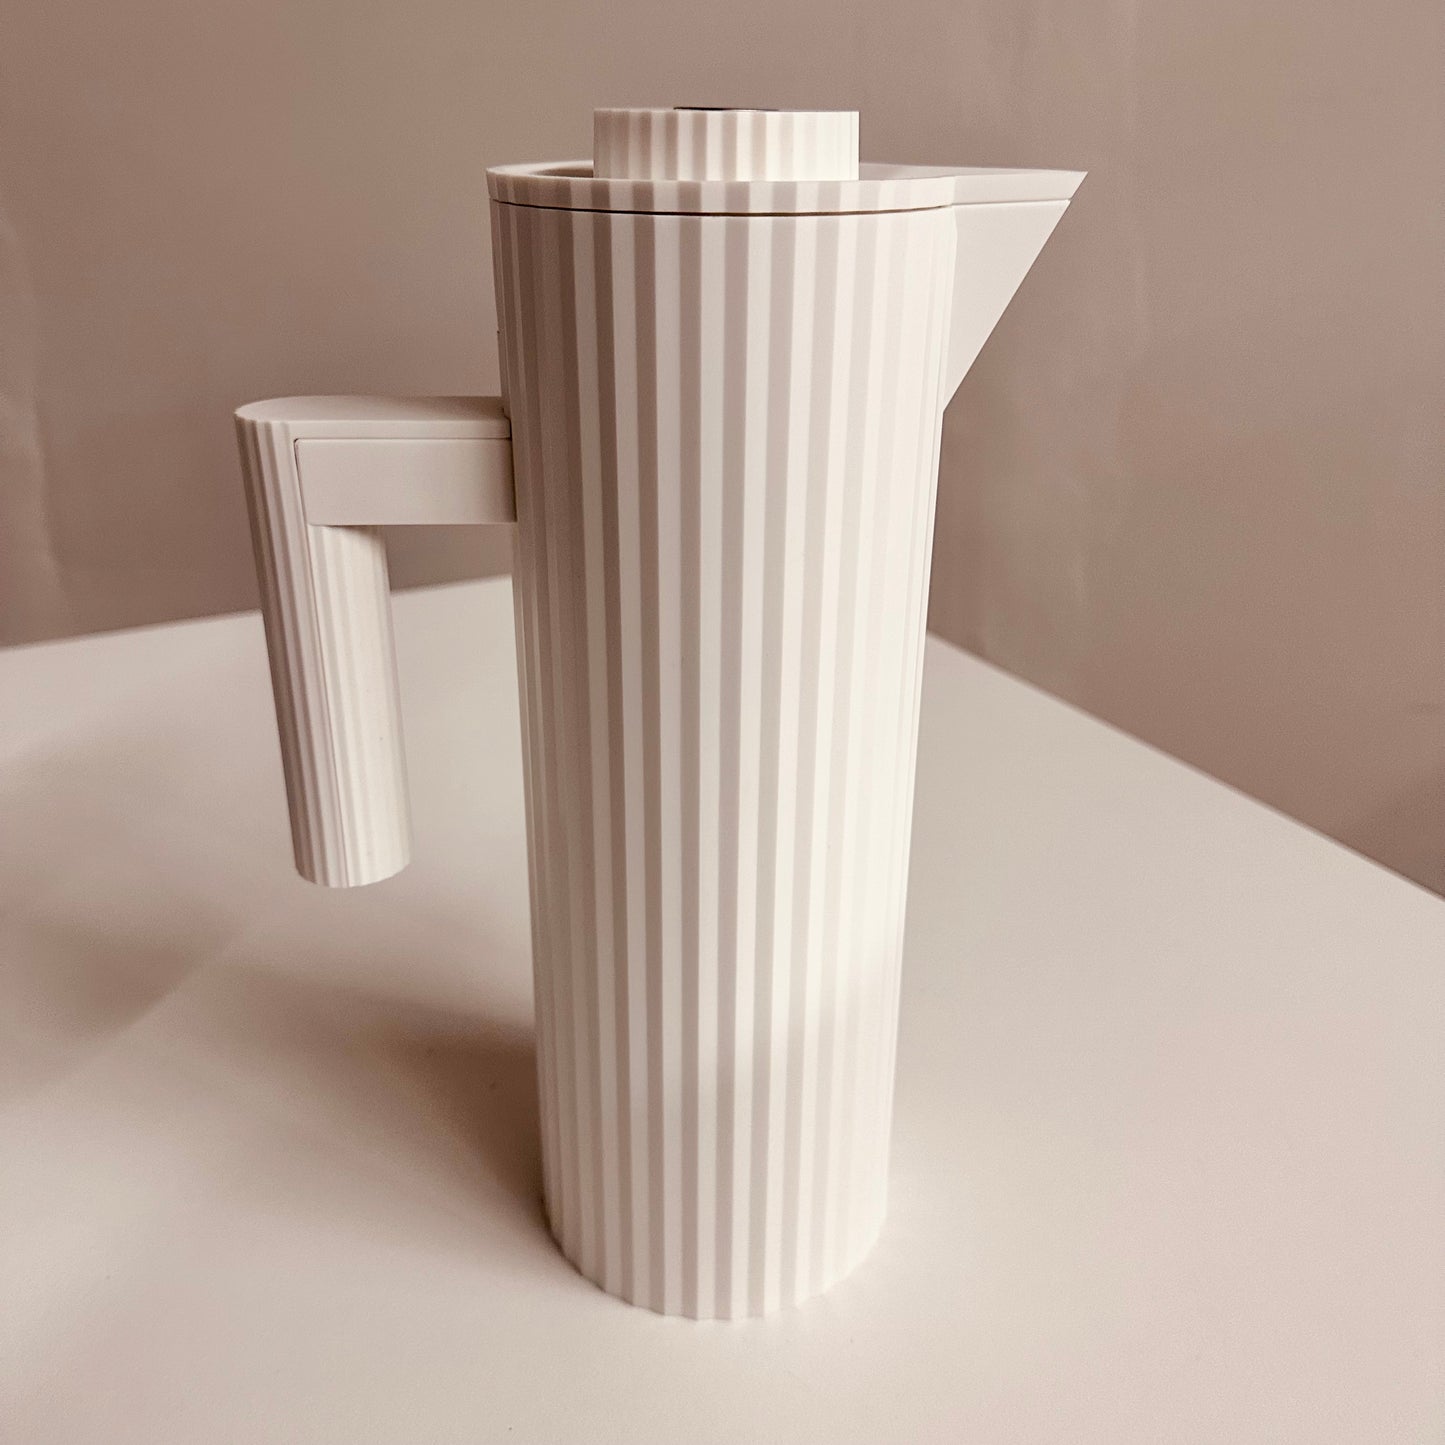 MICHELE DE LUCCHI FOR ALESSI PLISSÉ INSULATED THERMOS PITCHER